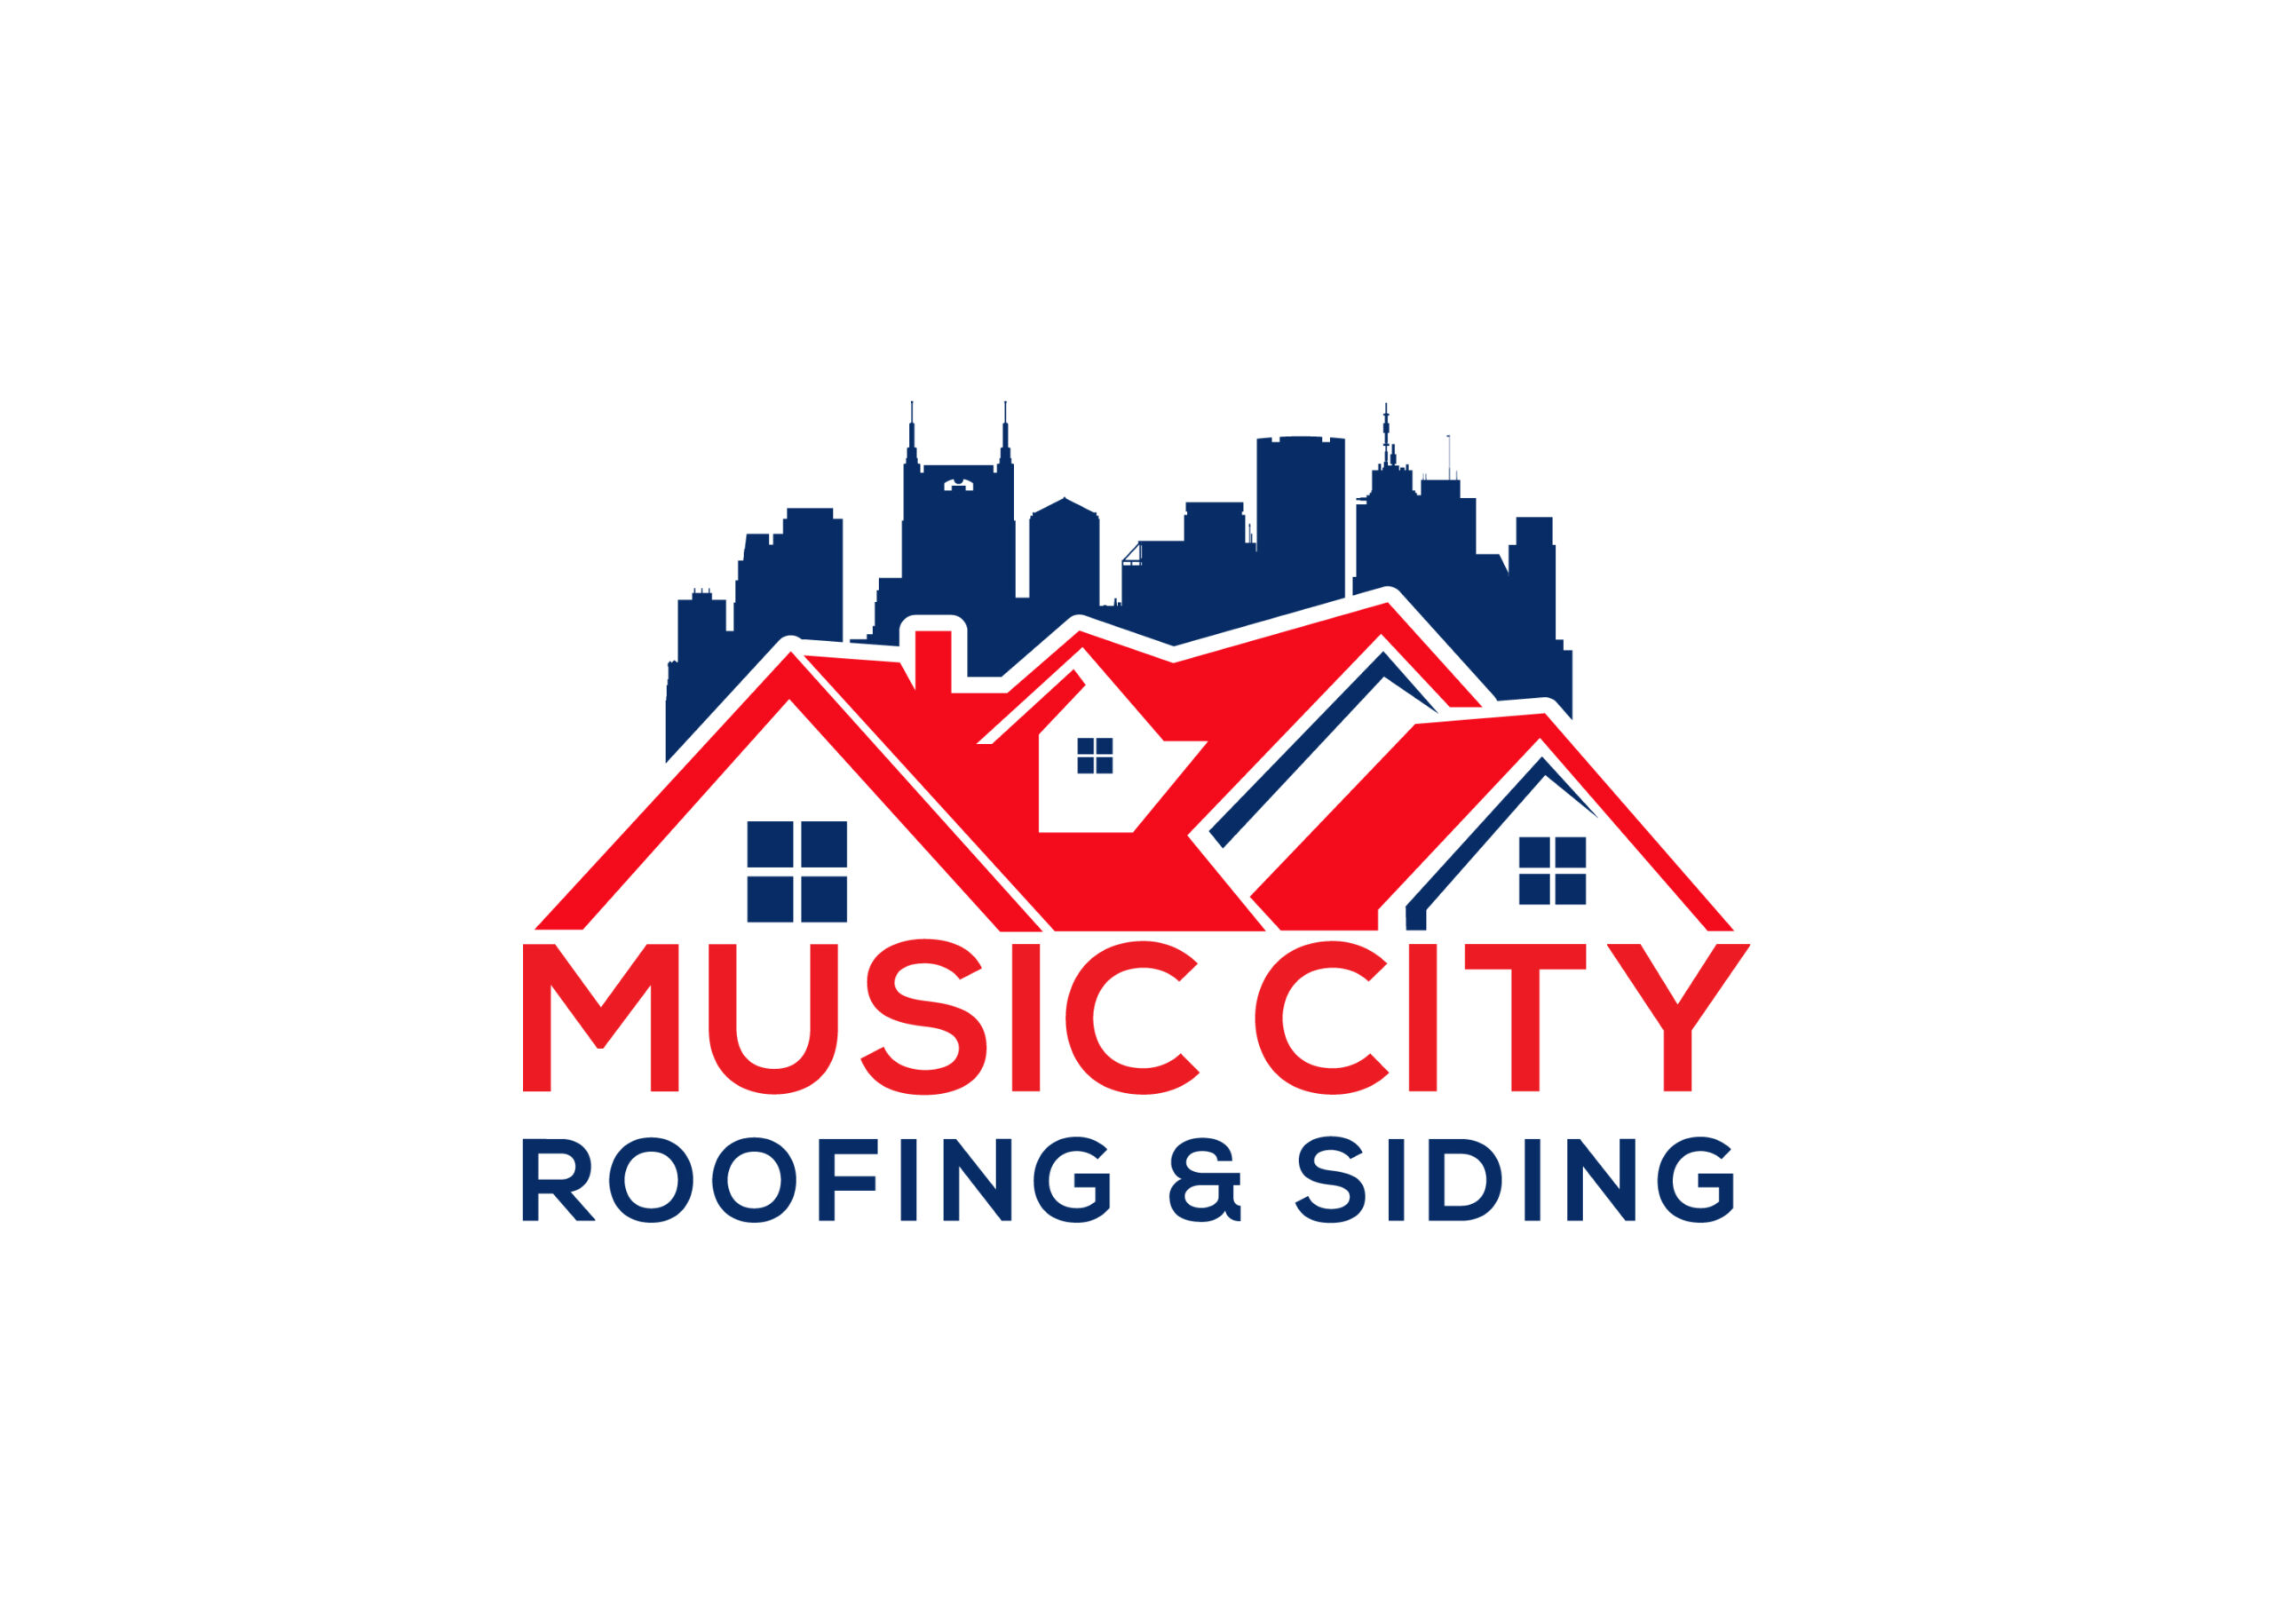 Music City Roofing & Siding